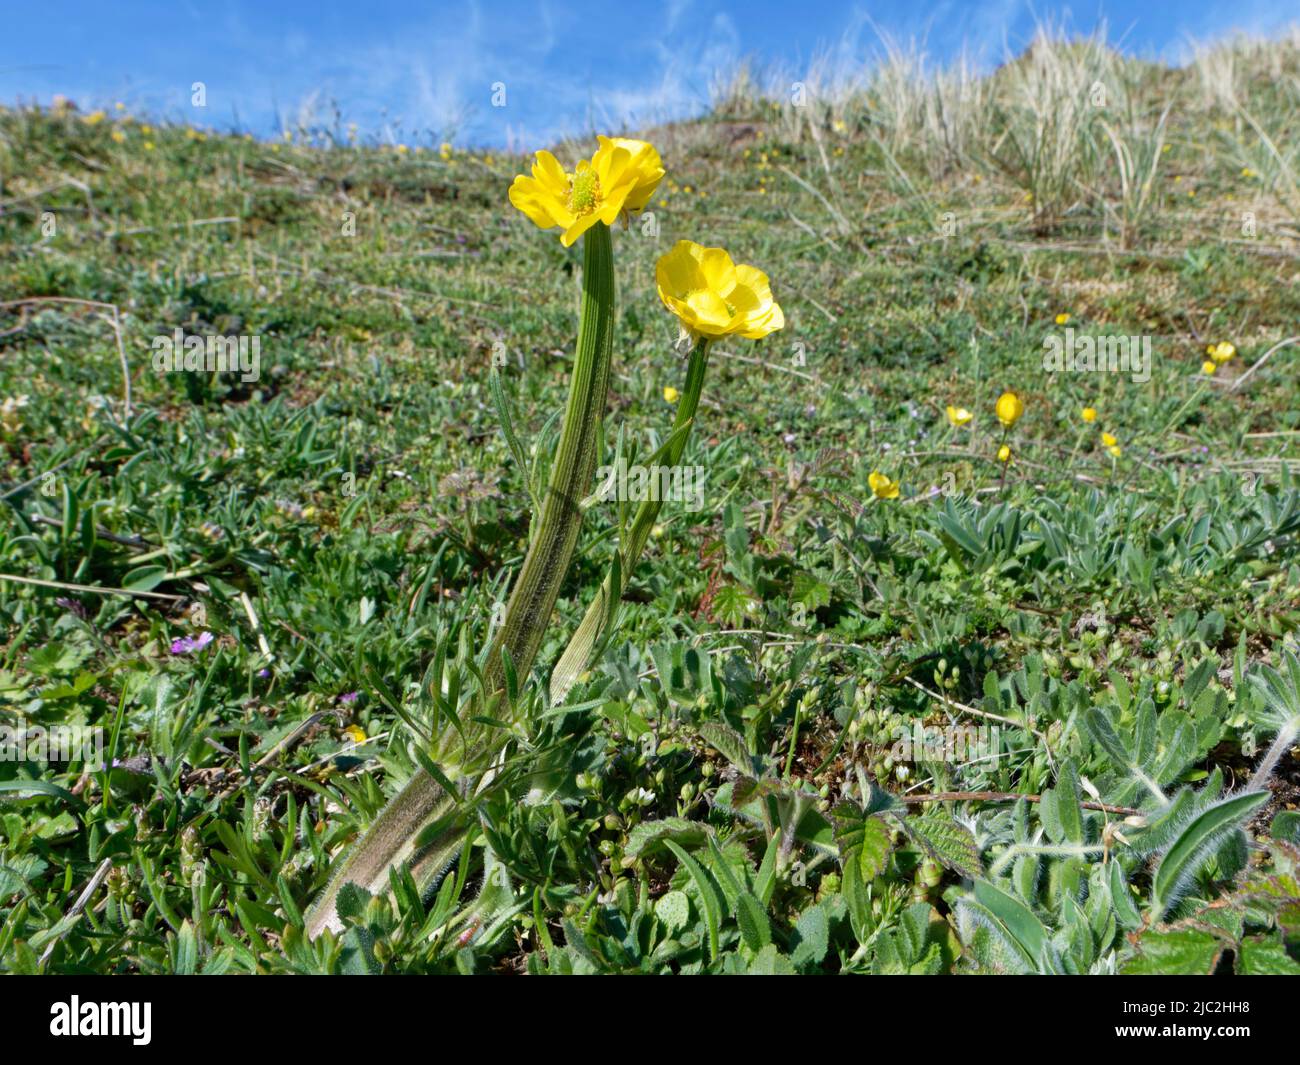 Bulbous buttercup (Ranunculus bulbosus) with flattened “fasciated” stems and elongated flowerheads, Kenfig NNR, Glamorgan, Wales, UK, May. Stock Photo